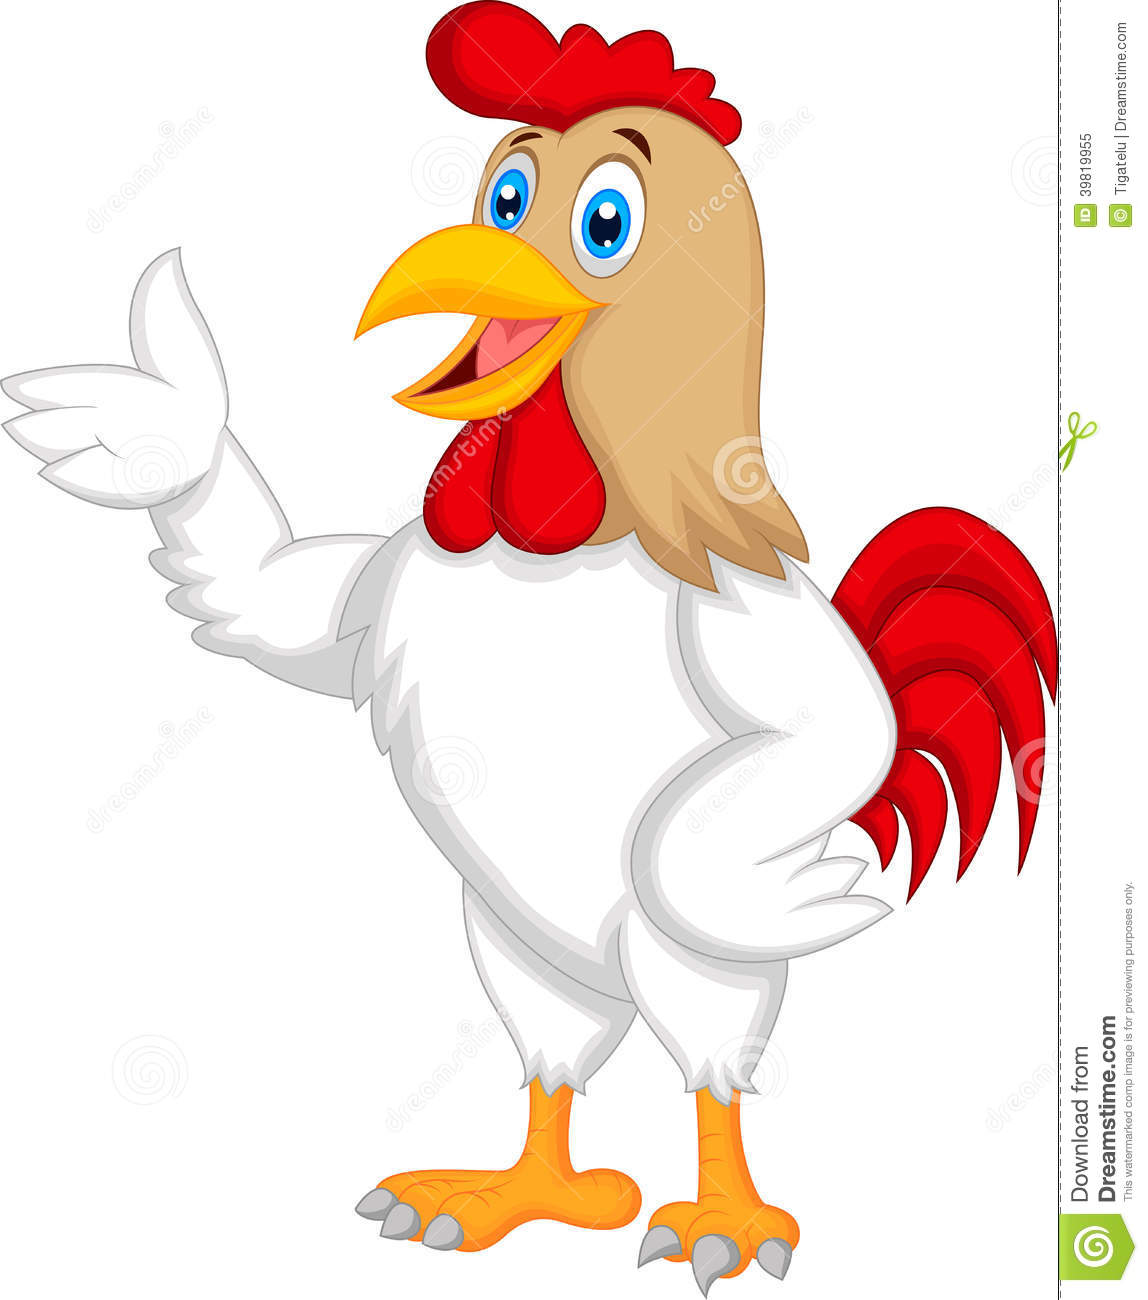 Rooster clip art rooster clipart fans 2